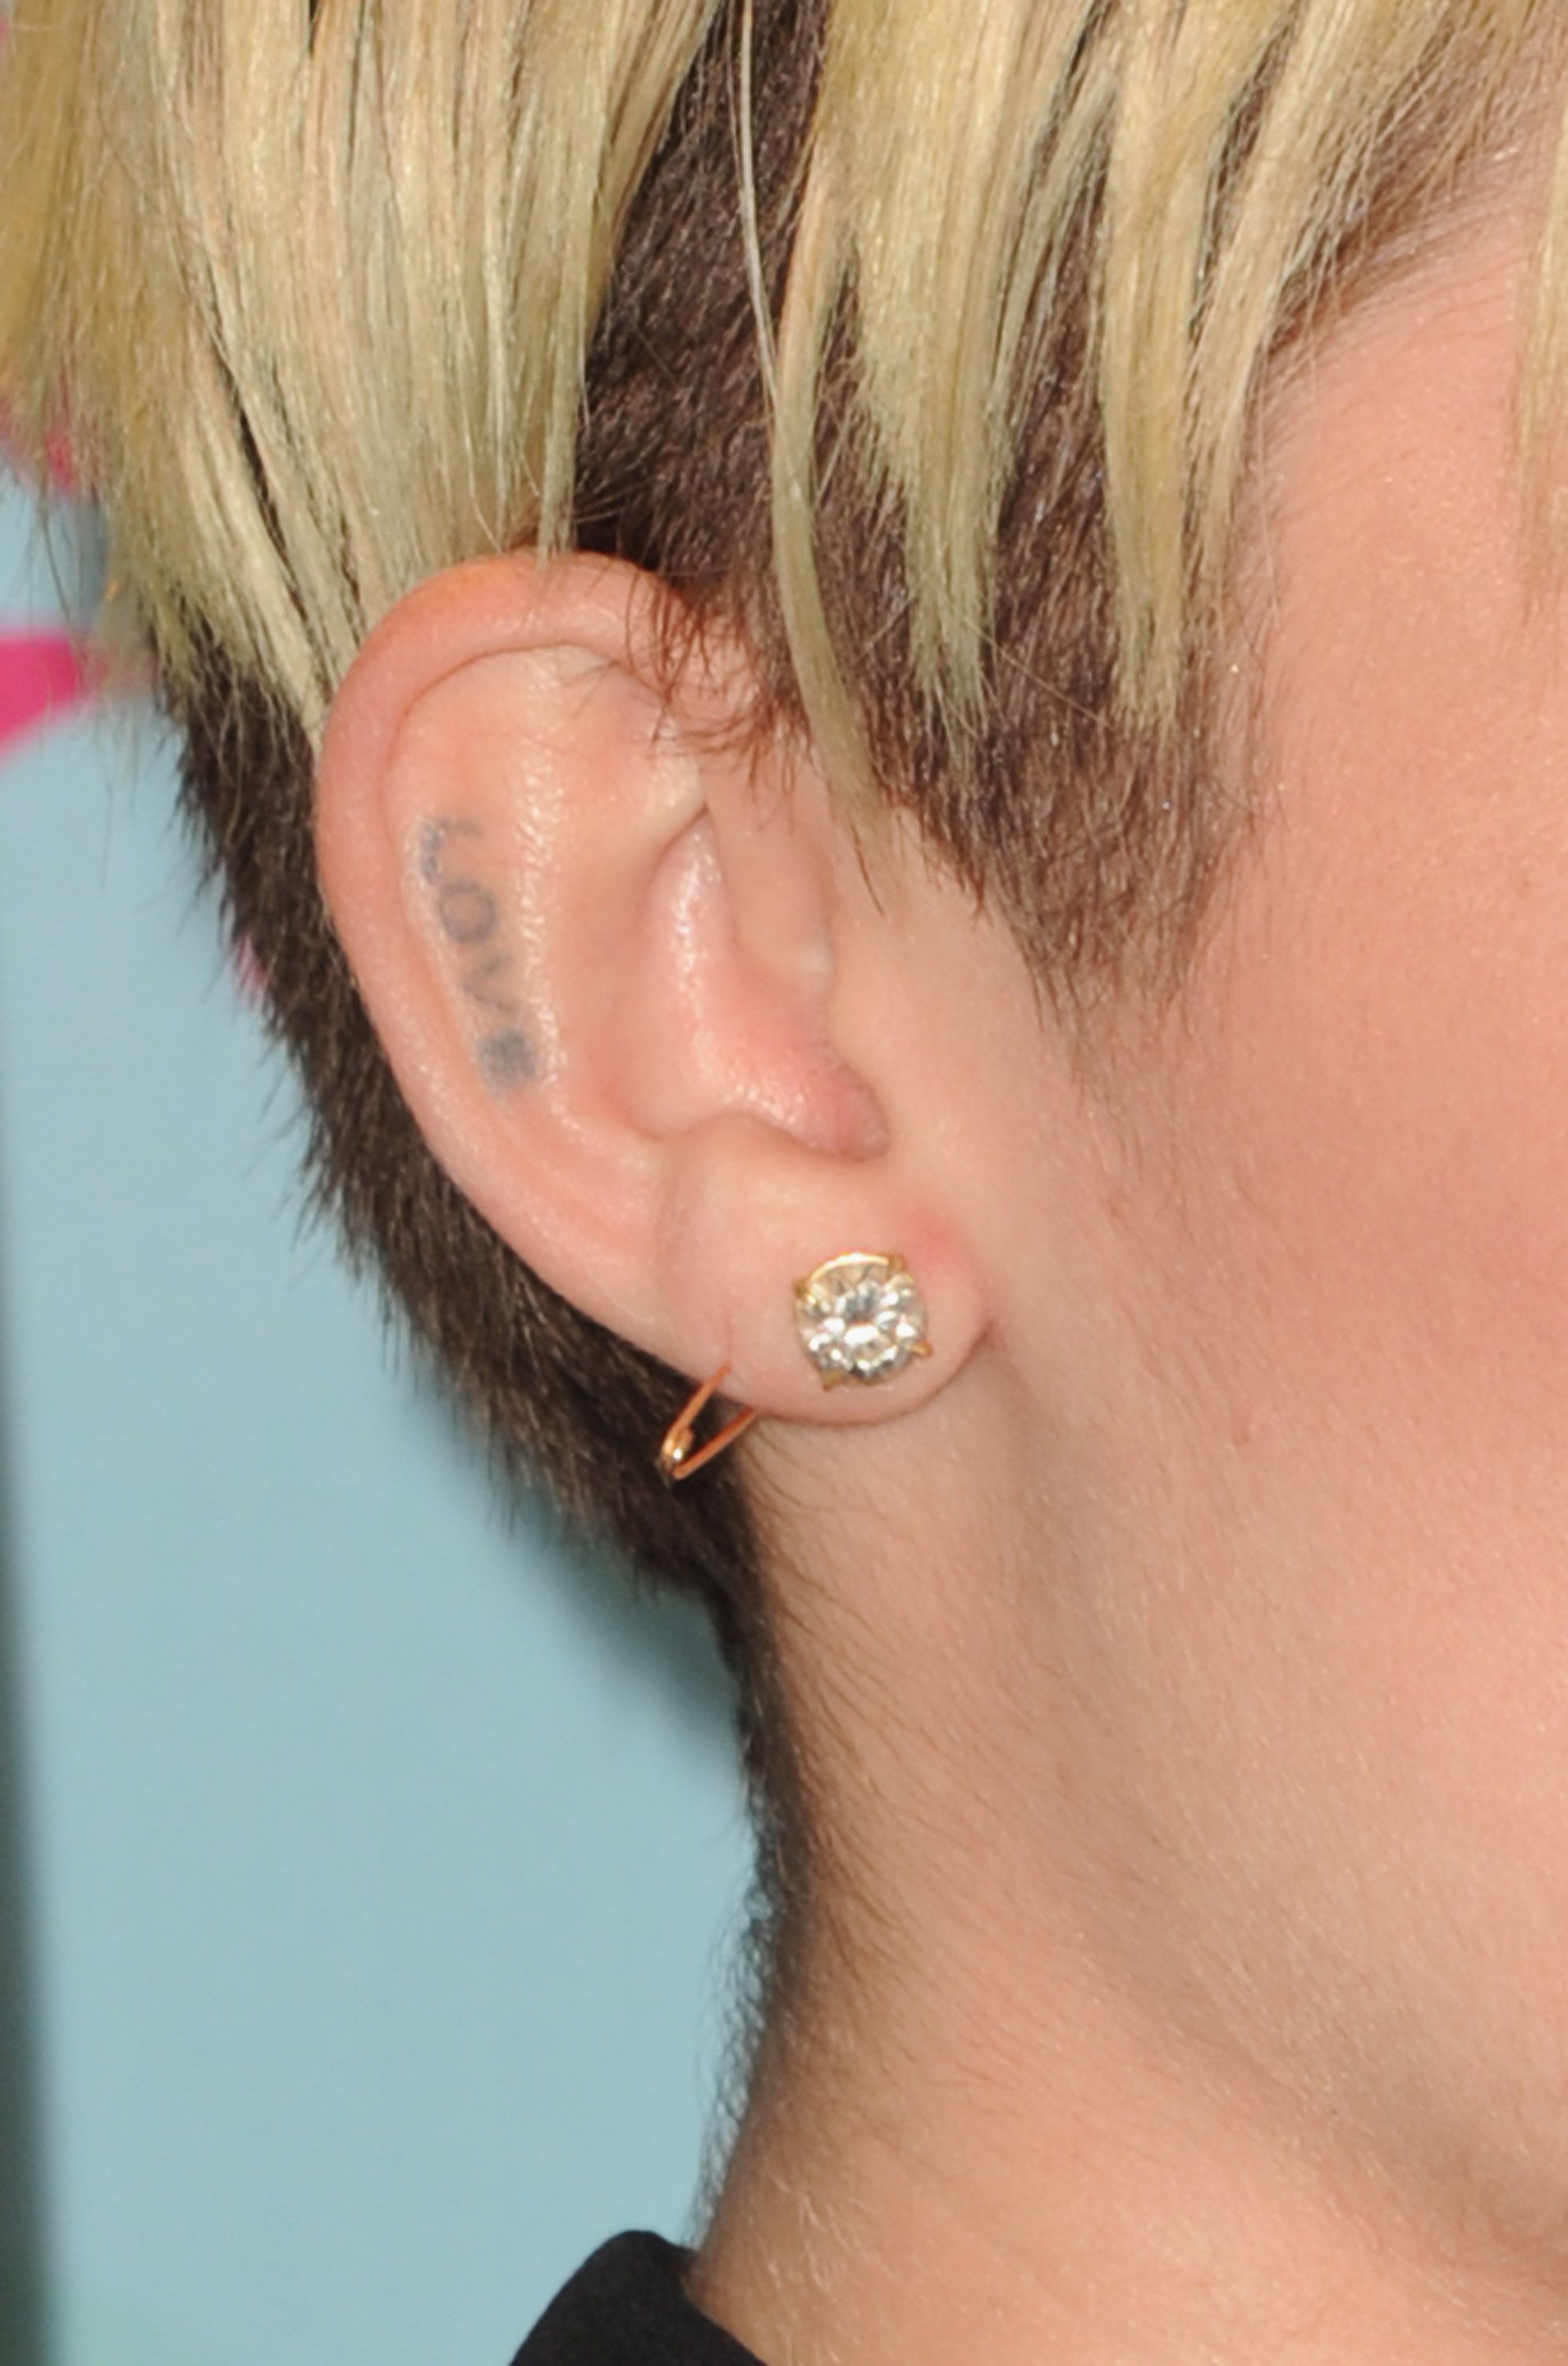 Miley Cyrus Hot Blonde Pussy - All of Miley Cyrus' Tattoos â€“ Miley Cyrus Tattoos and Their Meaning